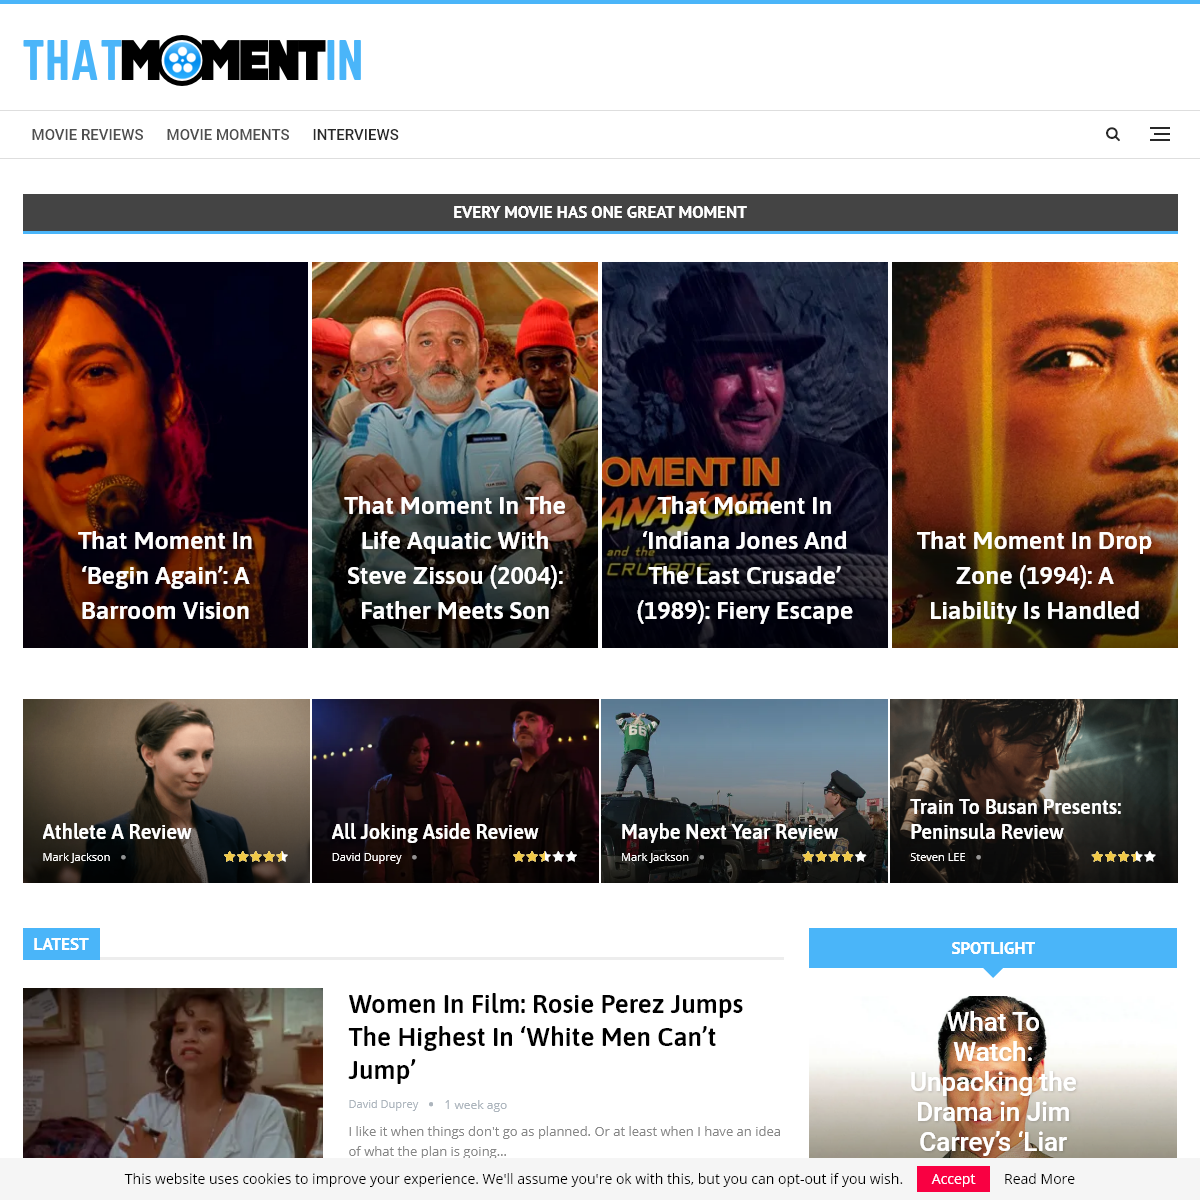 A complete backup of thatmomentin.com